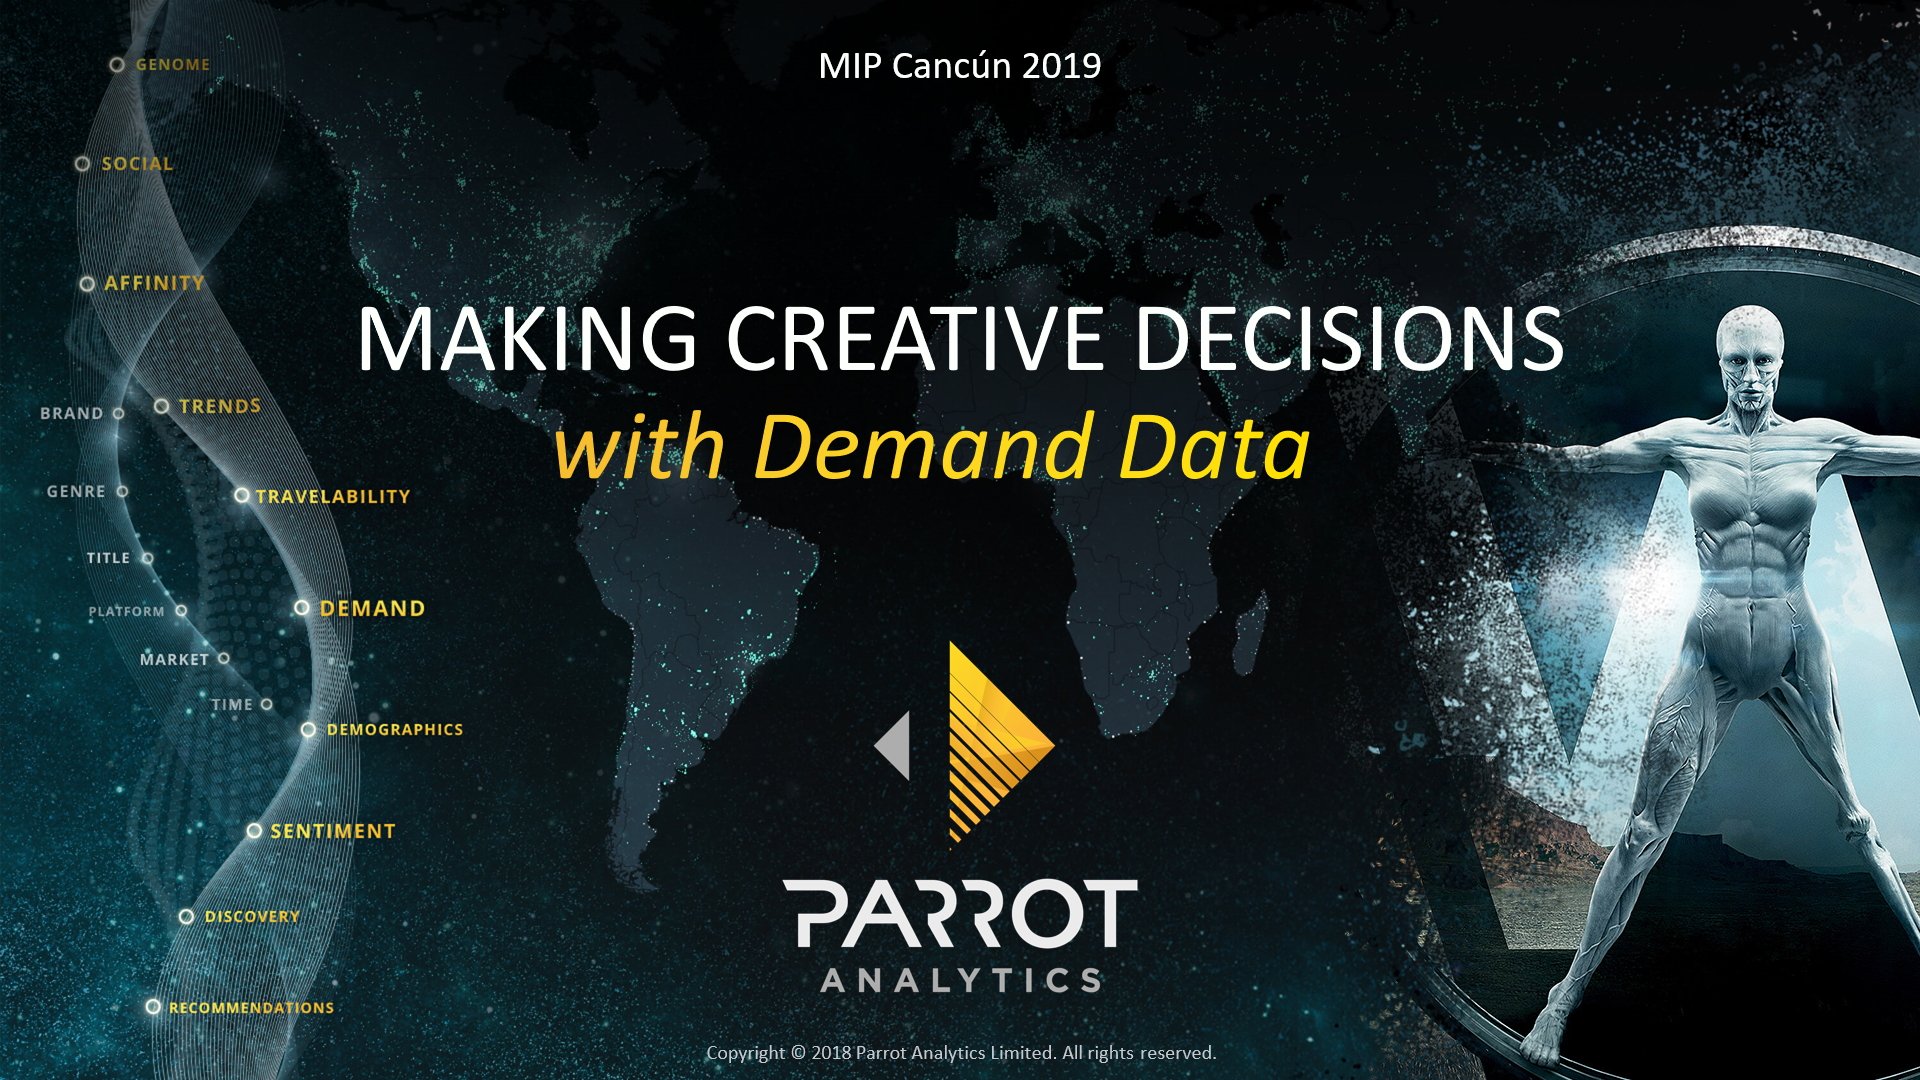 MIP Cancun 2019: Making creative decisions with demand data